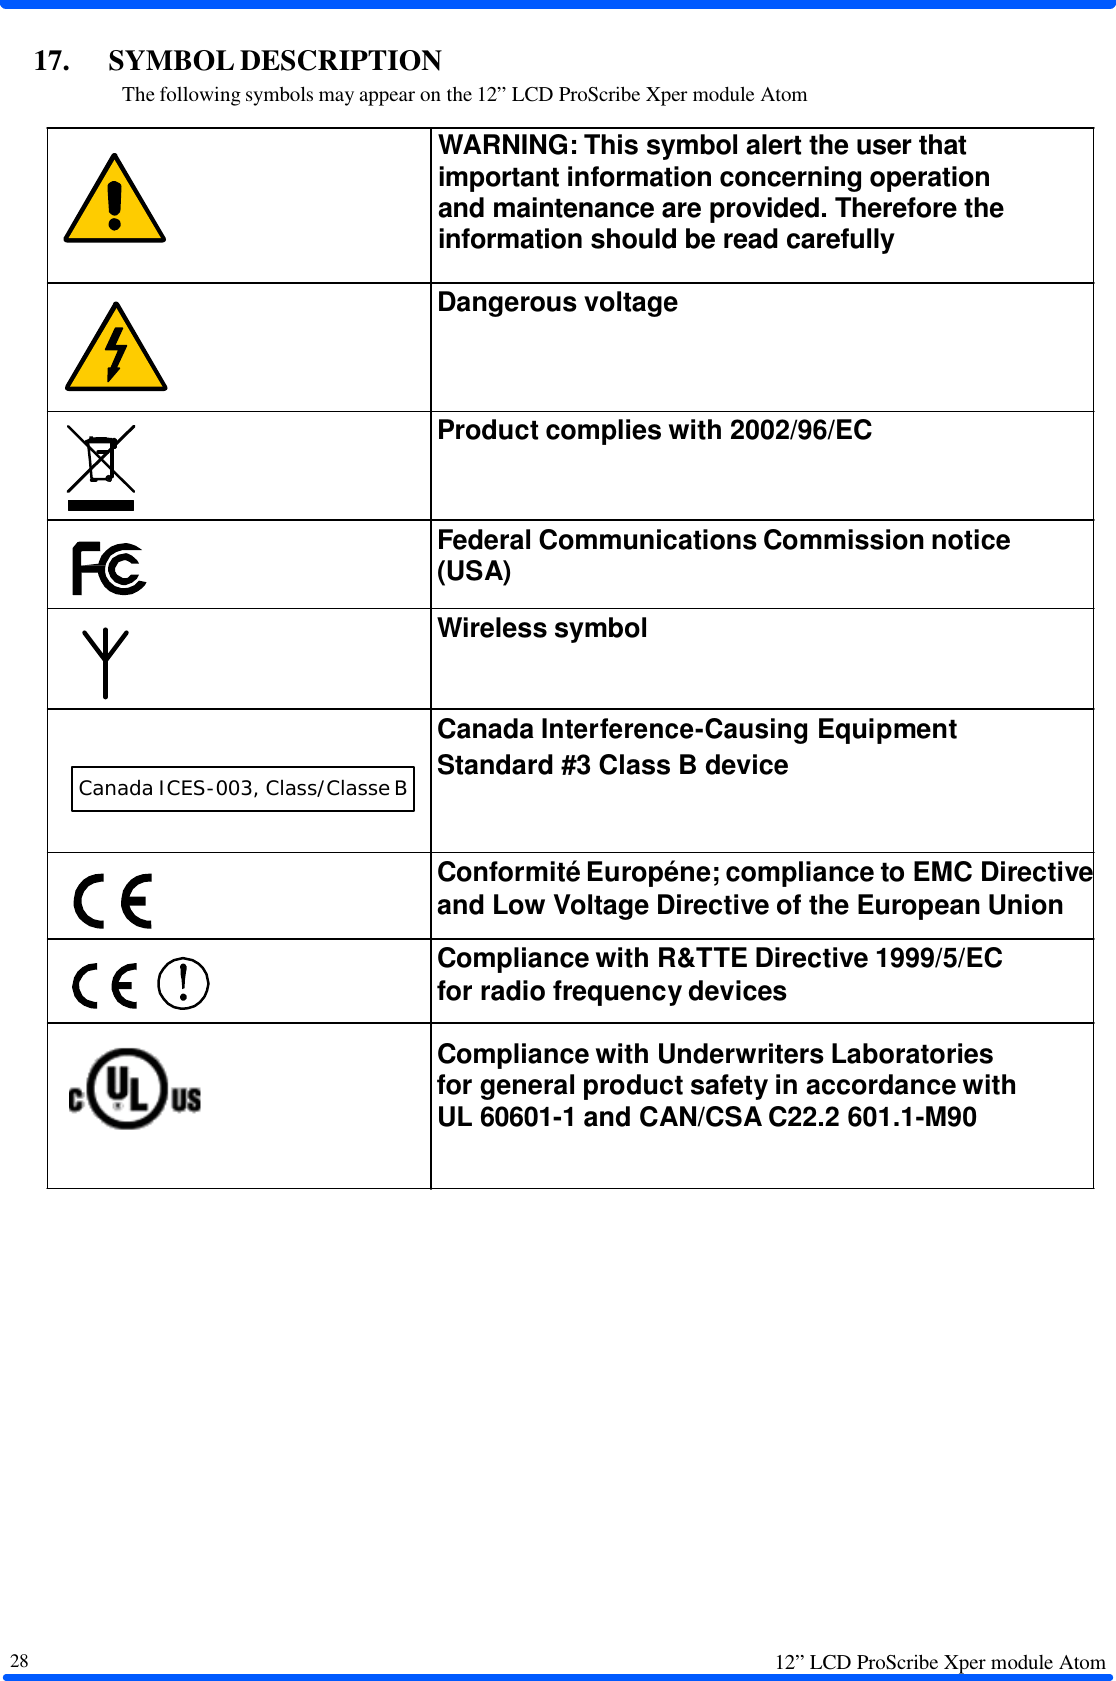 12” LCD ProScribe Xper module Atom   28    WARNING: This symbol alert the user that important information concerning operation and maintenance are provided. Therefore the information should be read carefully   Dangerous voltage   Product complies with 2002/96/EC   Federal Communications Commission notice (USA)   Wireless symbol   Canada Interference-Causing Equipment Standard #3 Class B device   Conformité Européne; compliance to EMC Directive and Low Voltage Directive of the European Union  Compliance with R&amp;TTE Directive 1999/5/EC for radio frequency devices   Compliance with Underwriters Laboratories for general product safety in accordance with UL 60601-1 and CAN/CSA C22.2 601.1-M90  Canada ICES-003, Class/Classe B   17.  SYMBOL DESCRIPTION The following symbols may appear on the 12” LCD ProScribe Xper module Atom                                                    